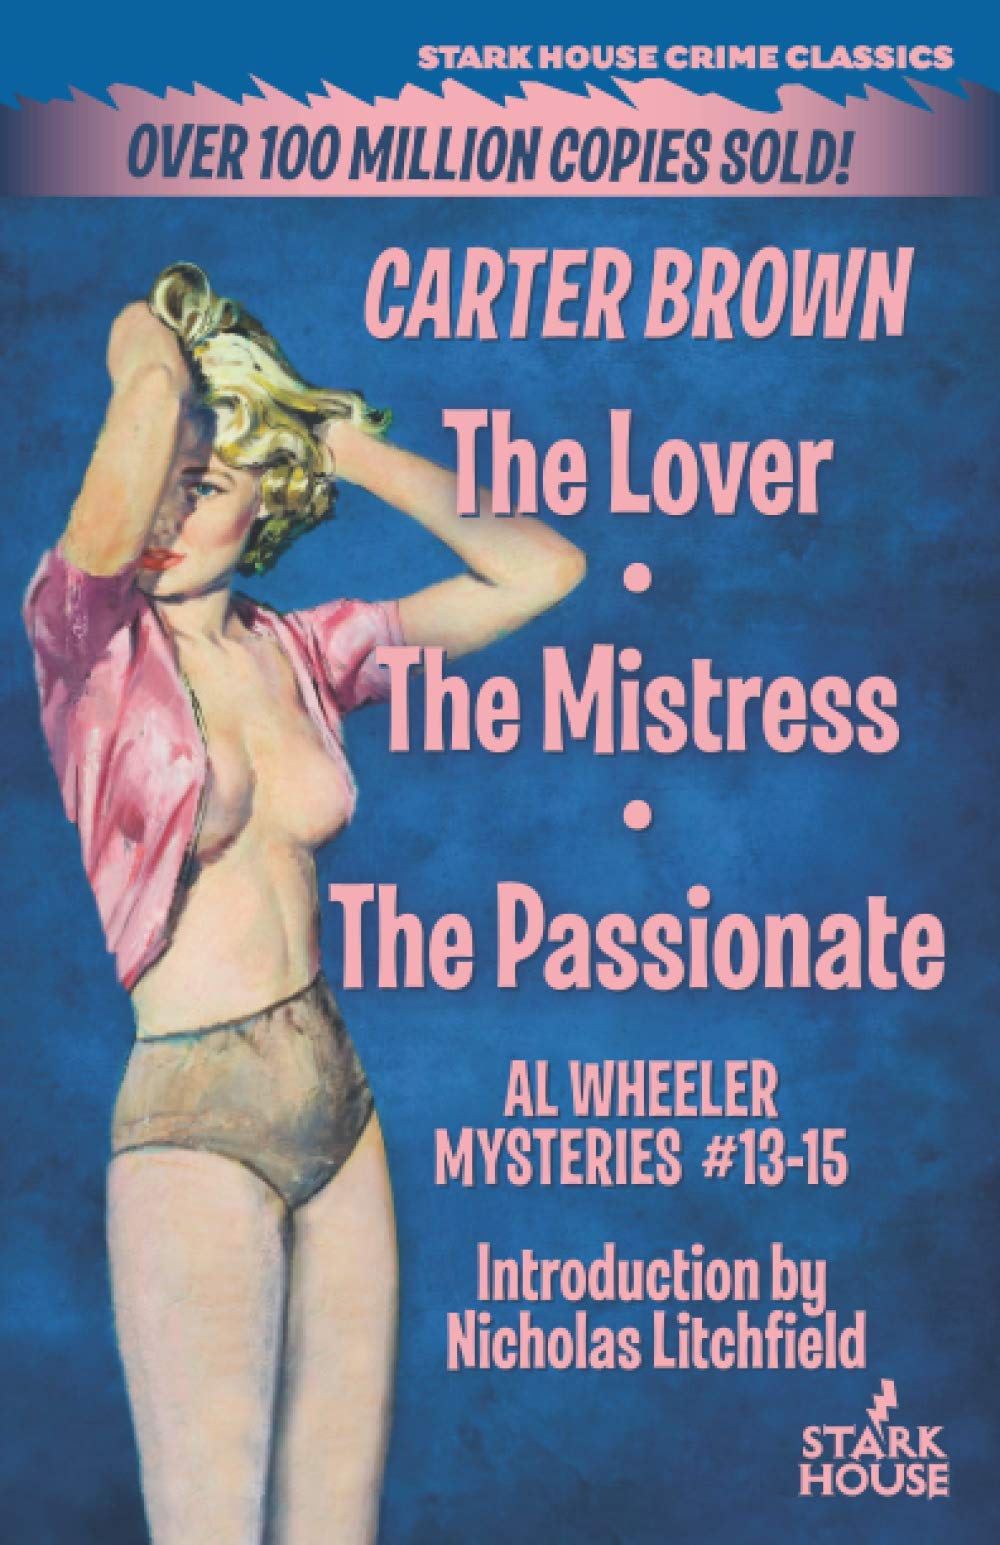 The Lover / The Mistress / The Passionate by Carter Brown (introduction by Nicholas Litchfield)